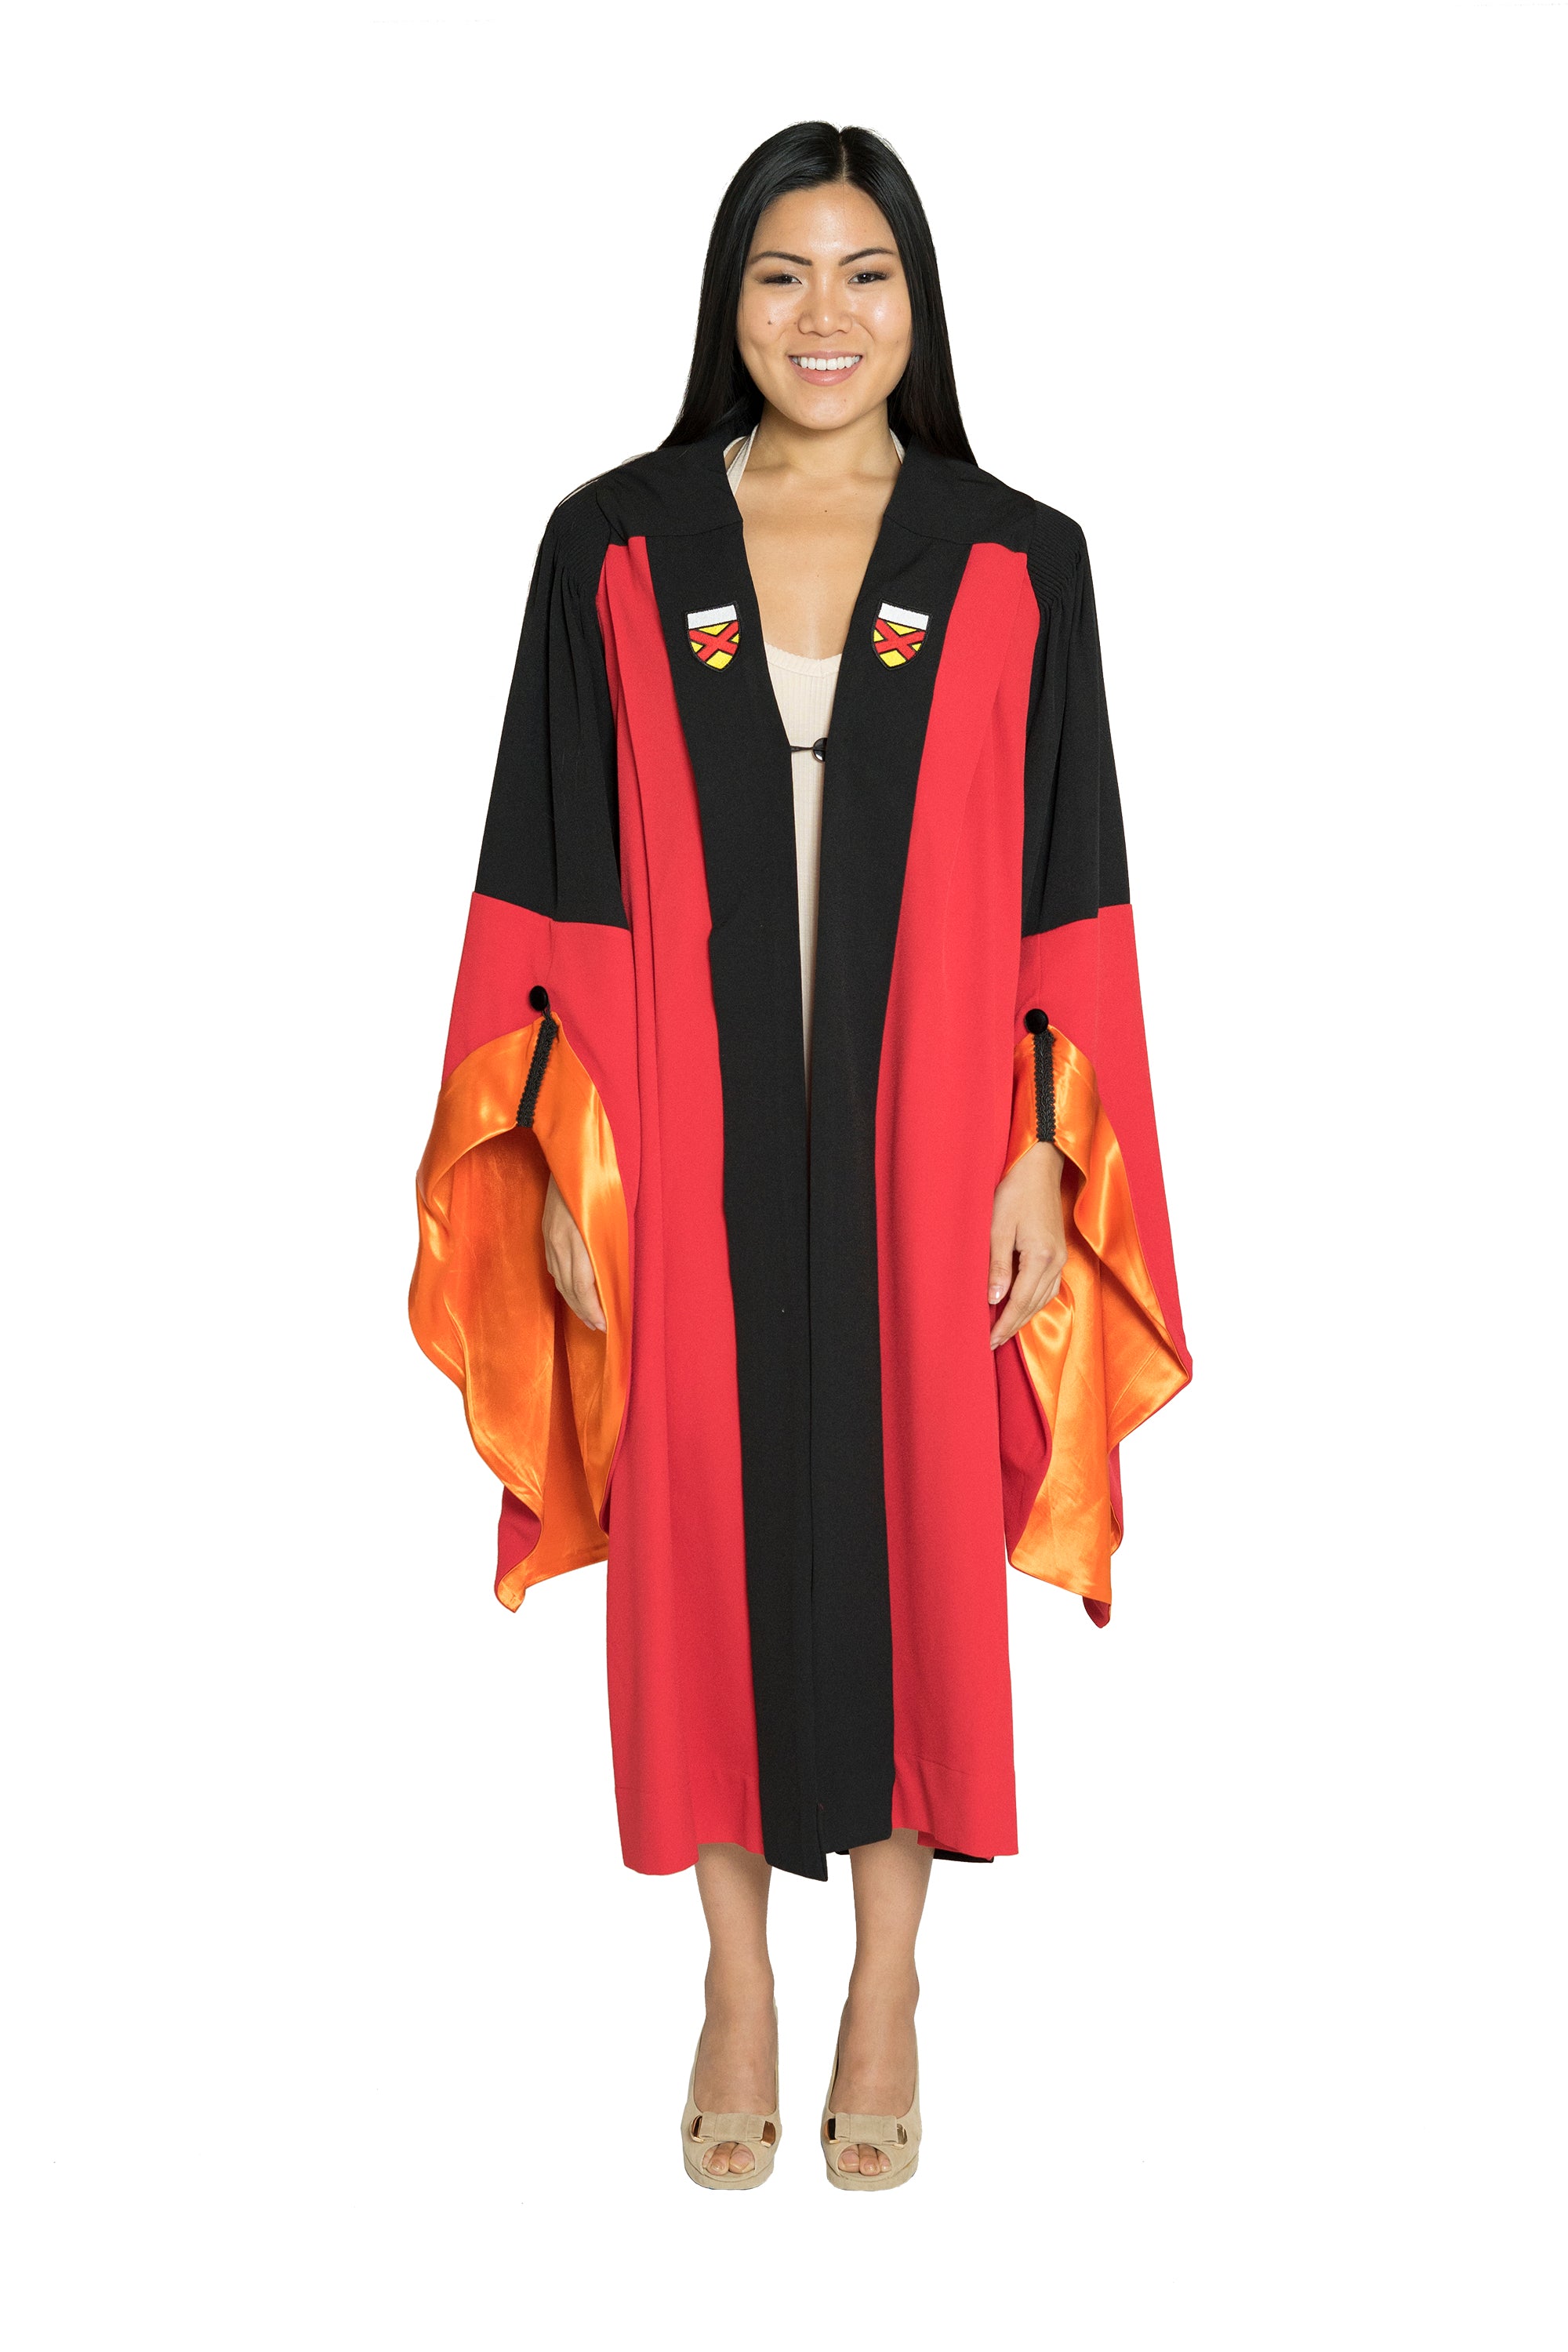 stanford phd graduation gown